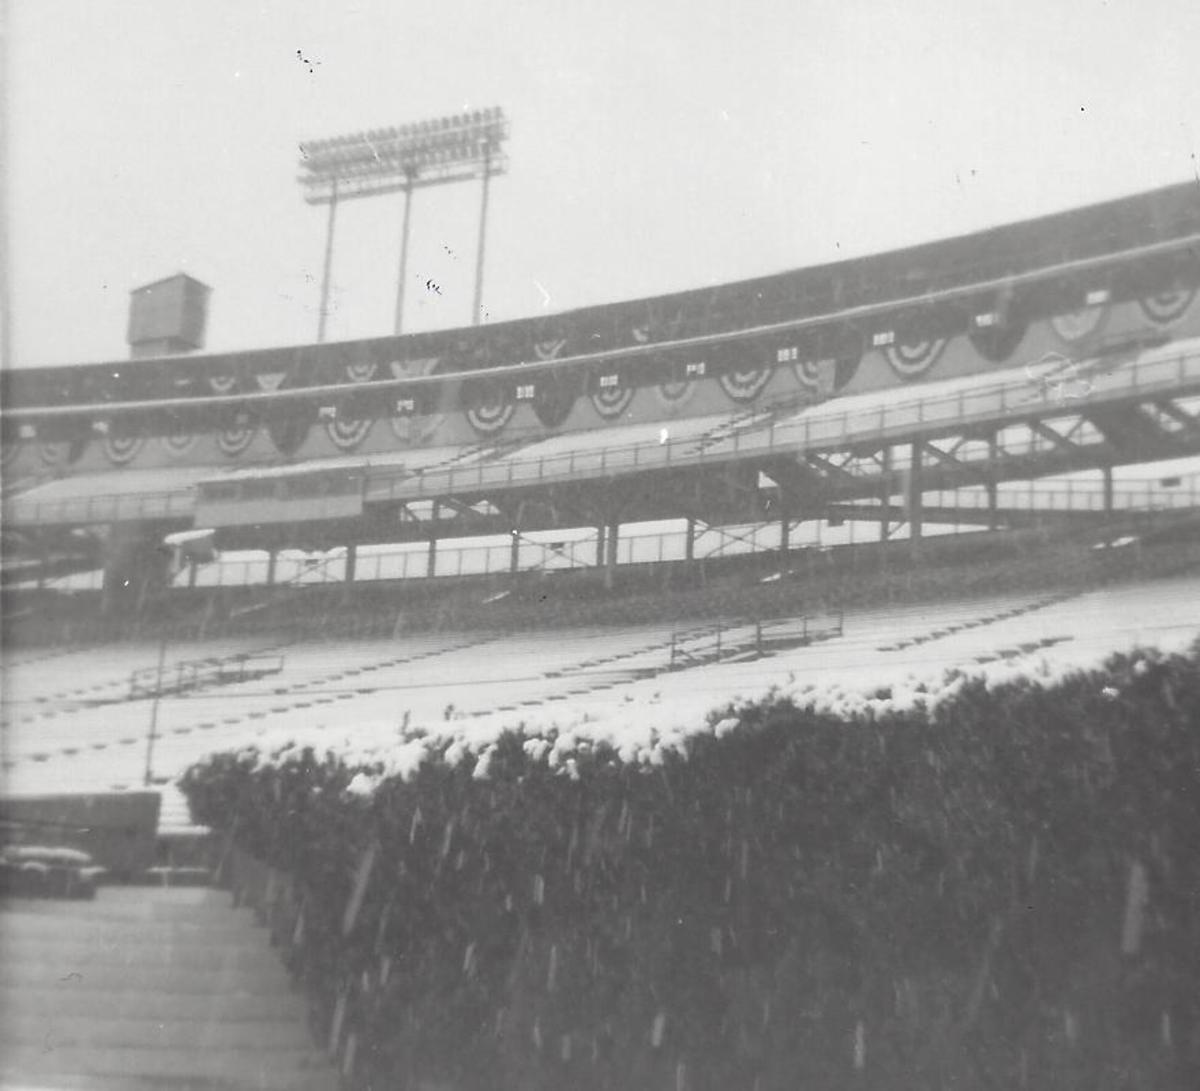 Alabama's chances in the 1964 Sugar Bowl were said to be the same as snow falling in New Orleans.